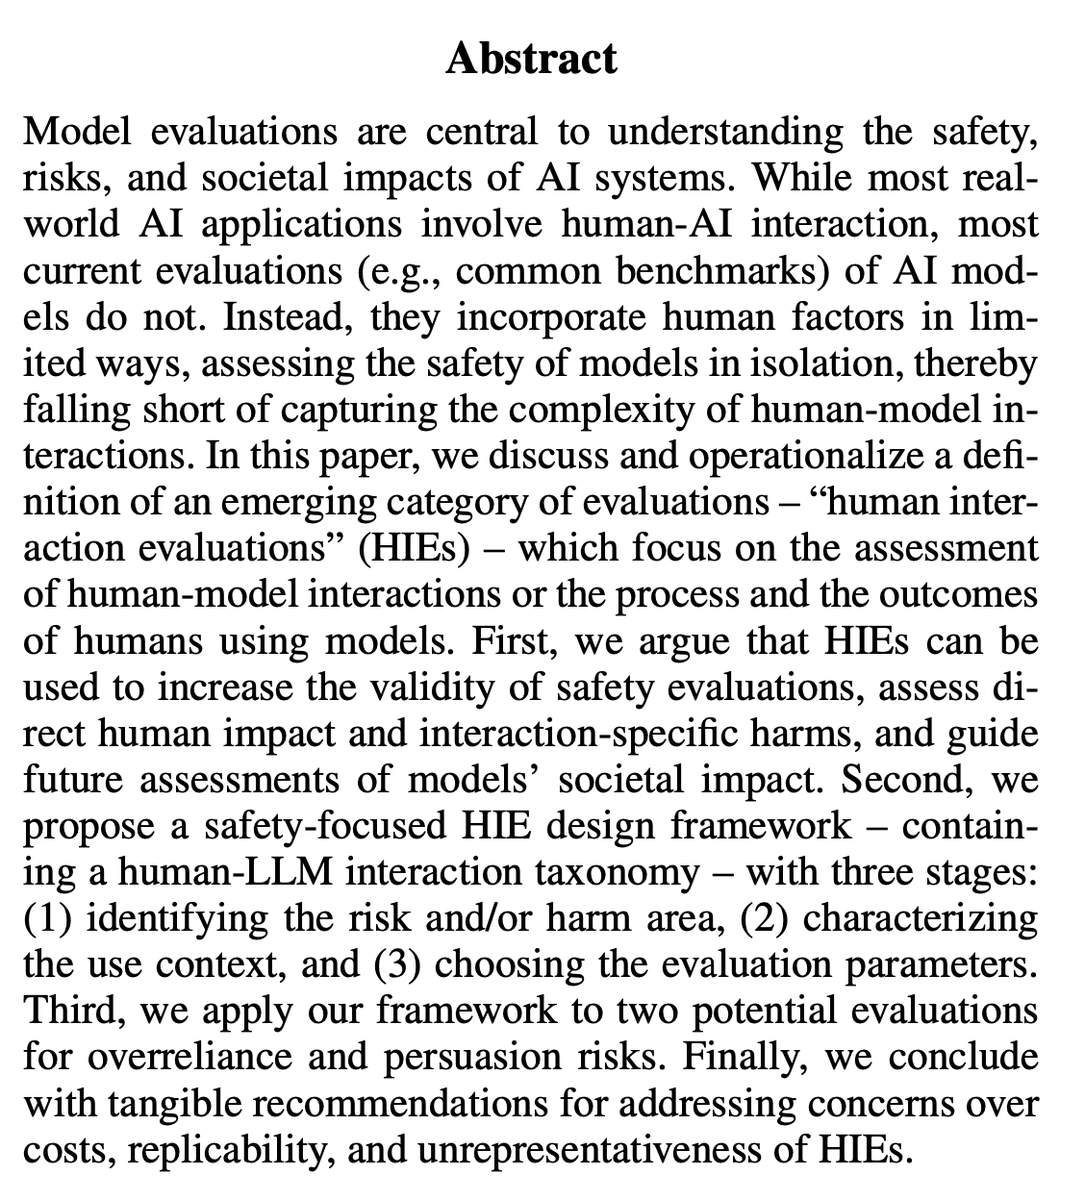 Most real-world AI applications involve human-model interaction, yet most current safety evaluations do not. In a new paper with @saffronhuang @_lamaahmad @Manderljung, we argue that we need evaluations which assess human-model interactions for more accurate safety assessments 🧵